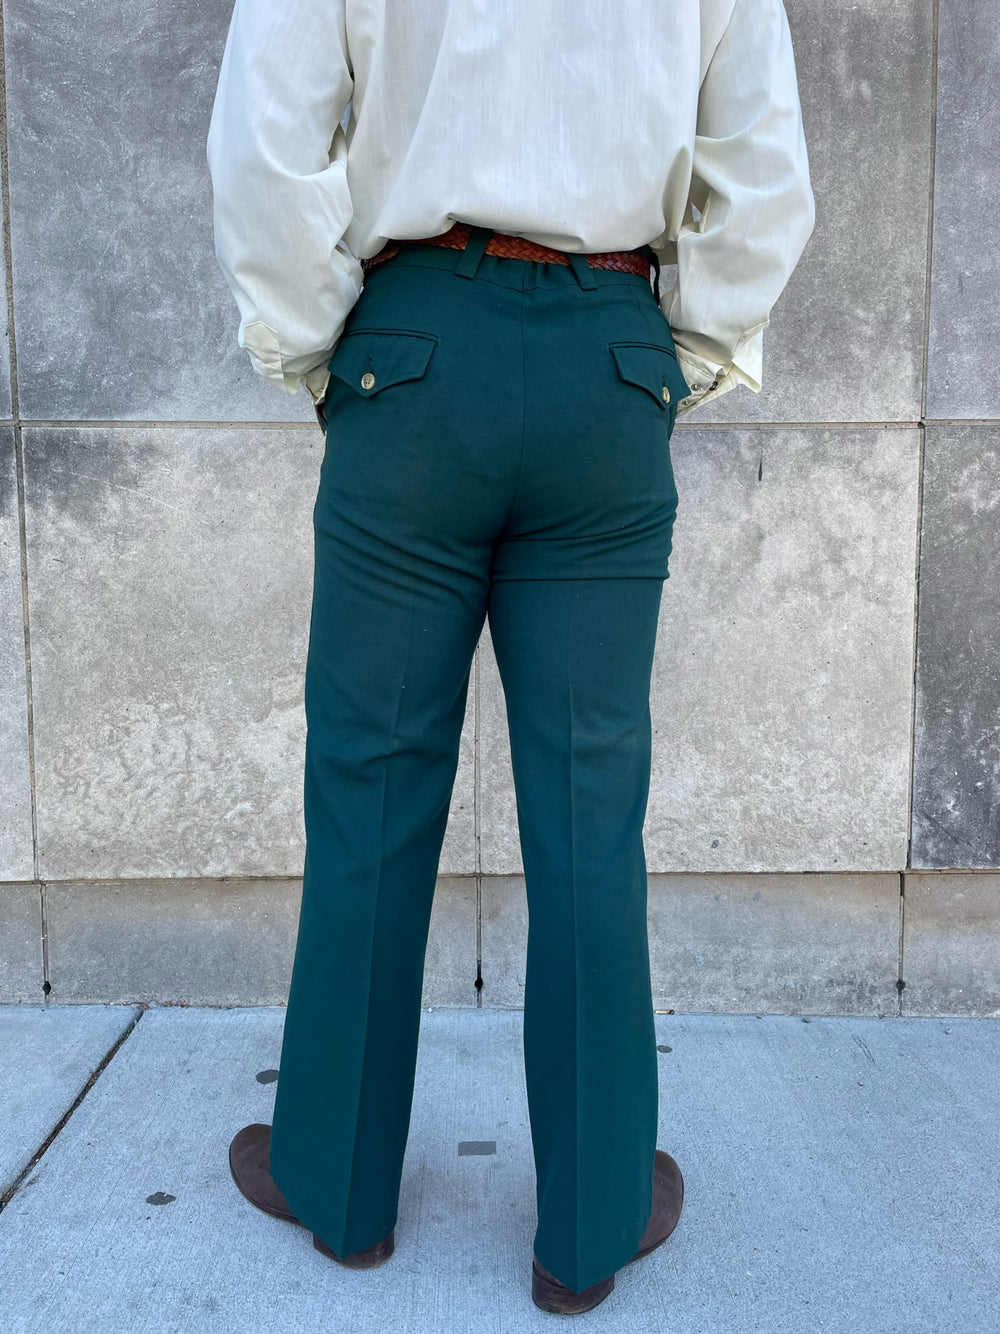 Mens 70s Vintage Green Bell Bottom Polyester Pants, Levis Panatela Signature Collection